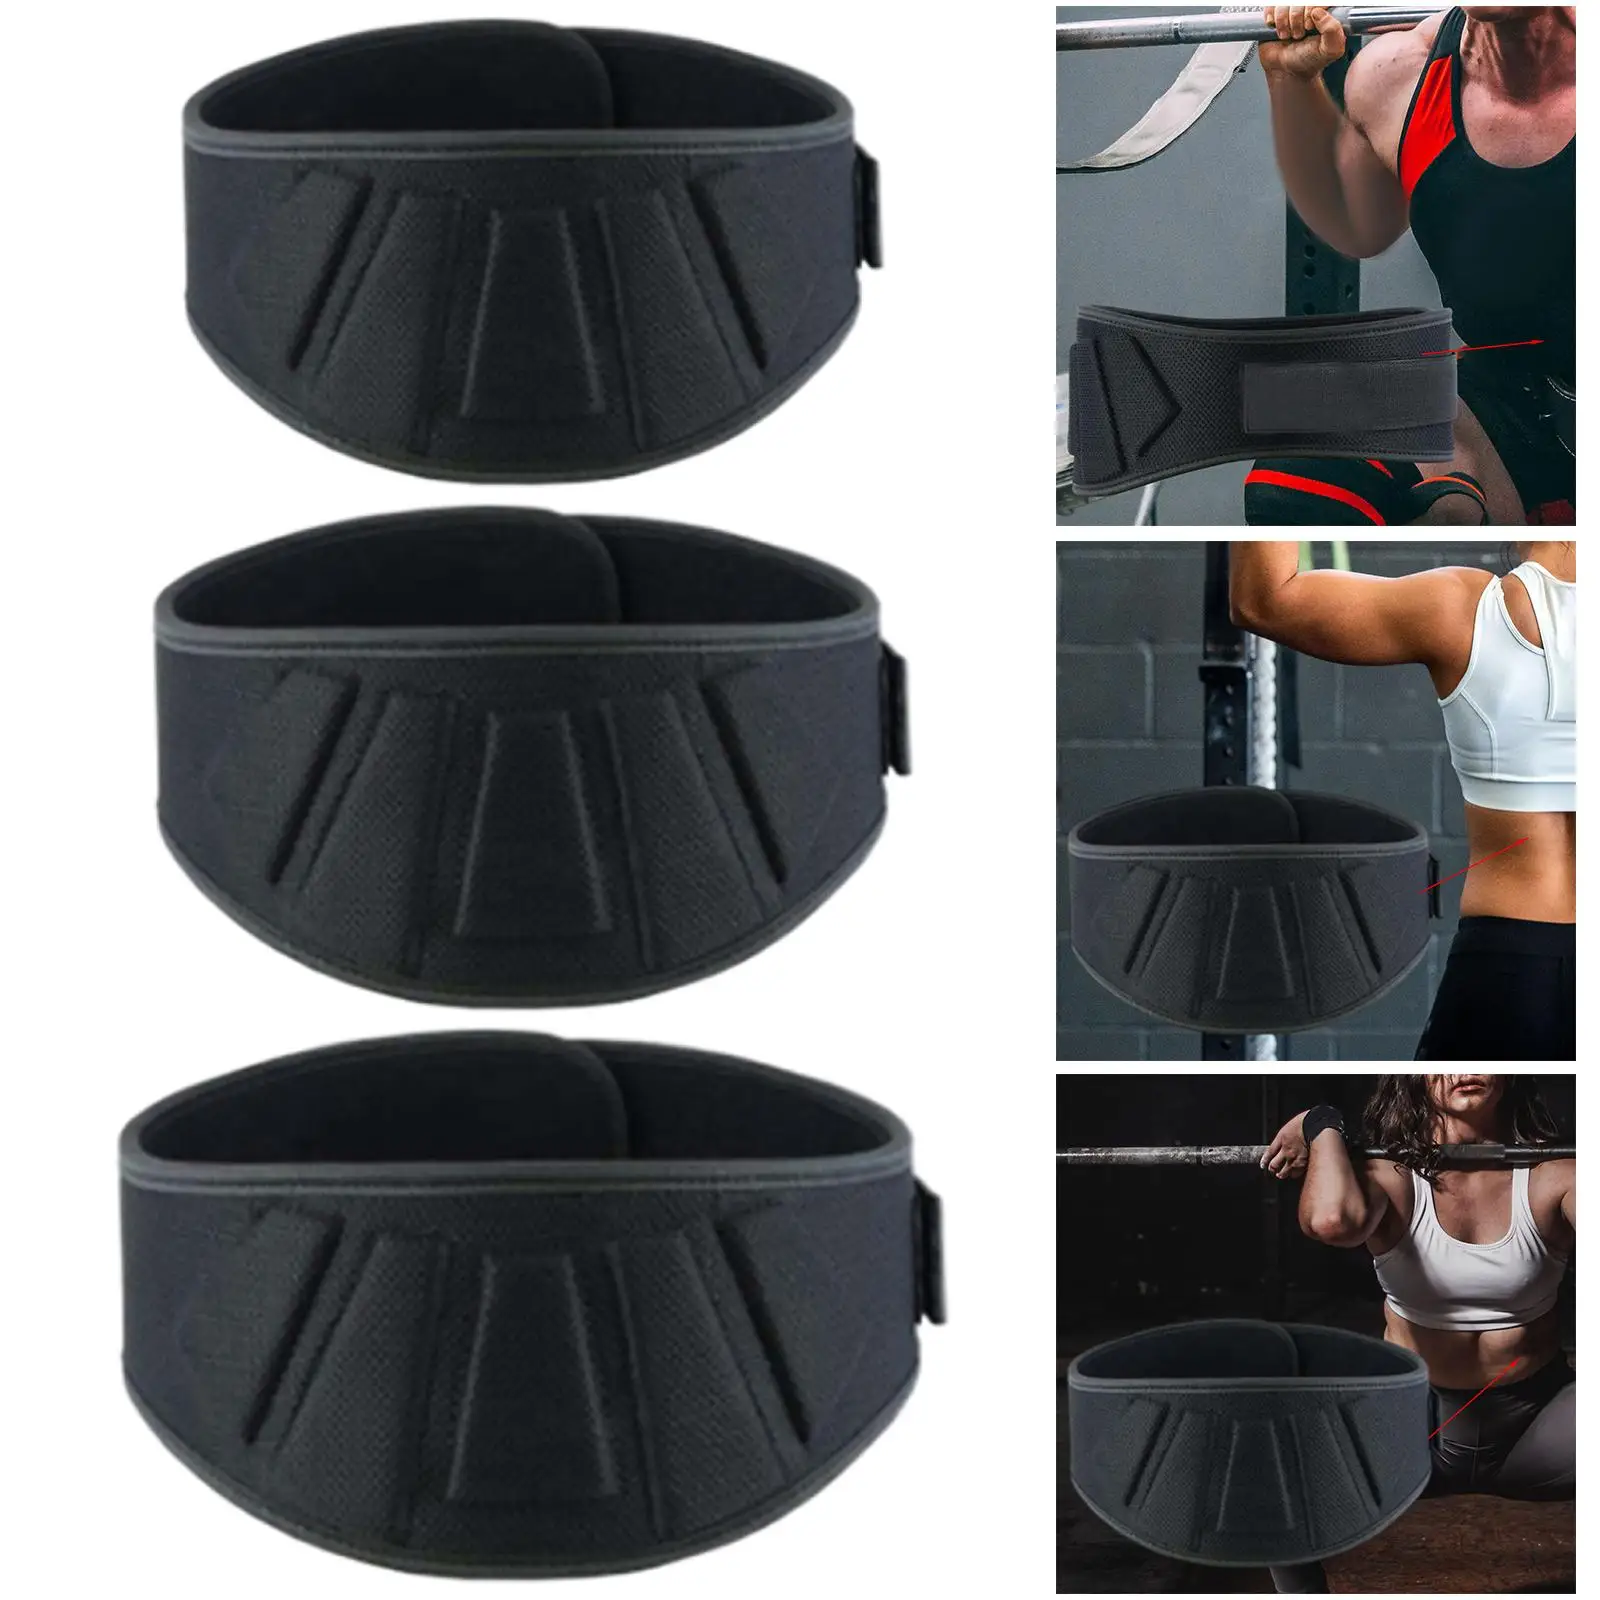 Premium Powerlifting Belt, Weight Lifting Belt, Lower Back Support for